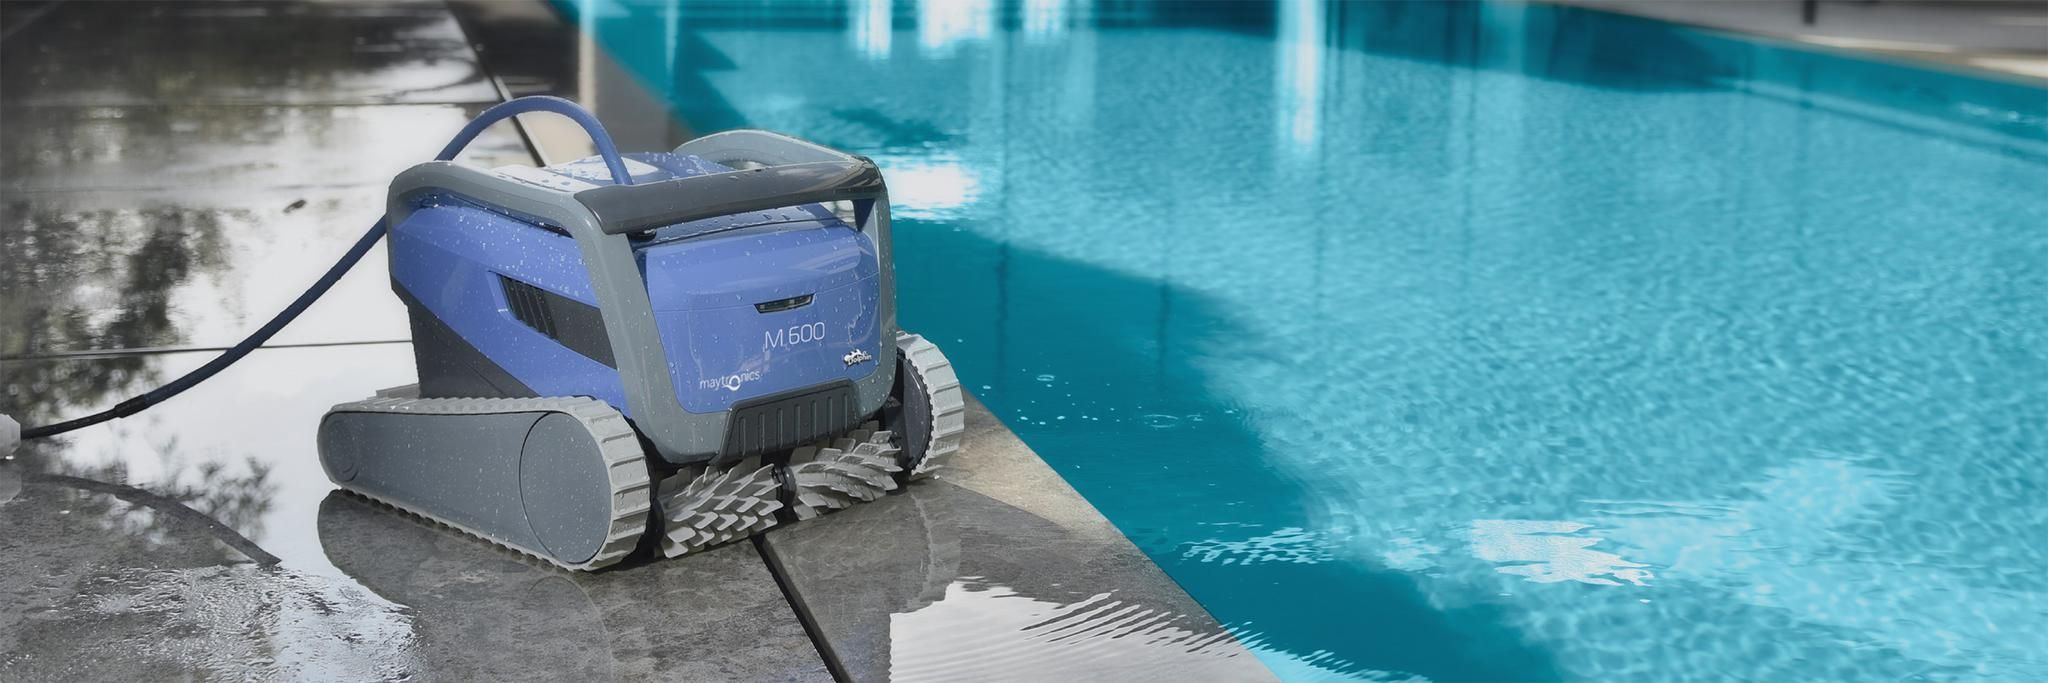 The Dolphin family expands again with the smart M600 pool cleaner